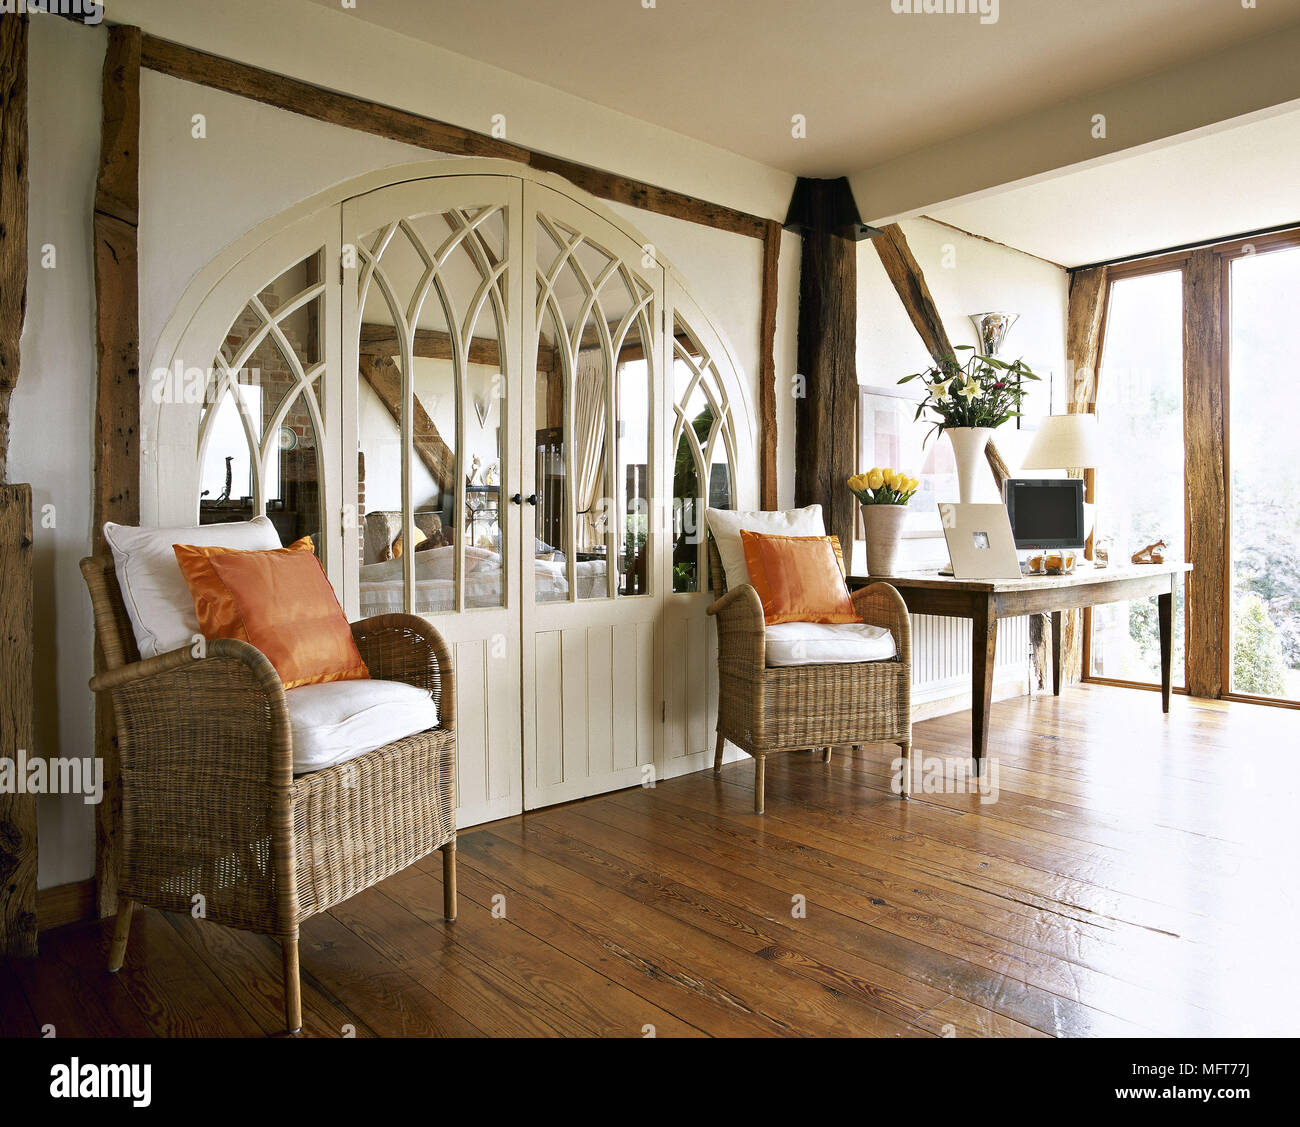 A Country Style Sitting Room With Hard Wood Floor Beams